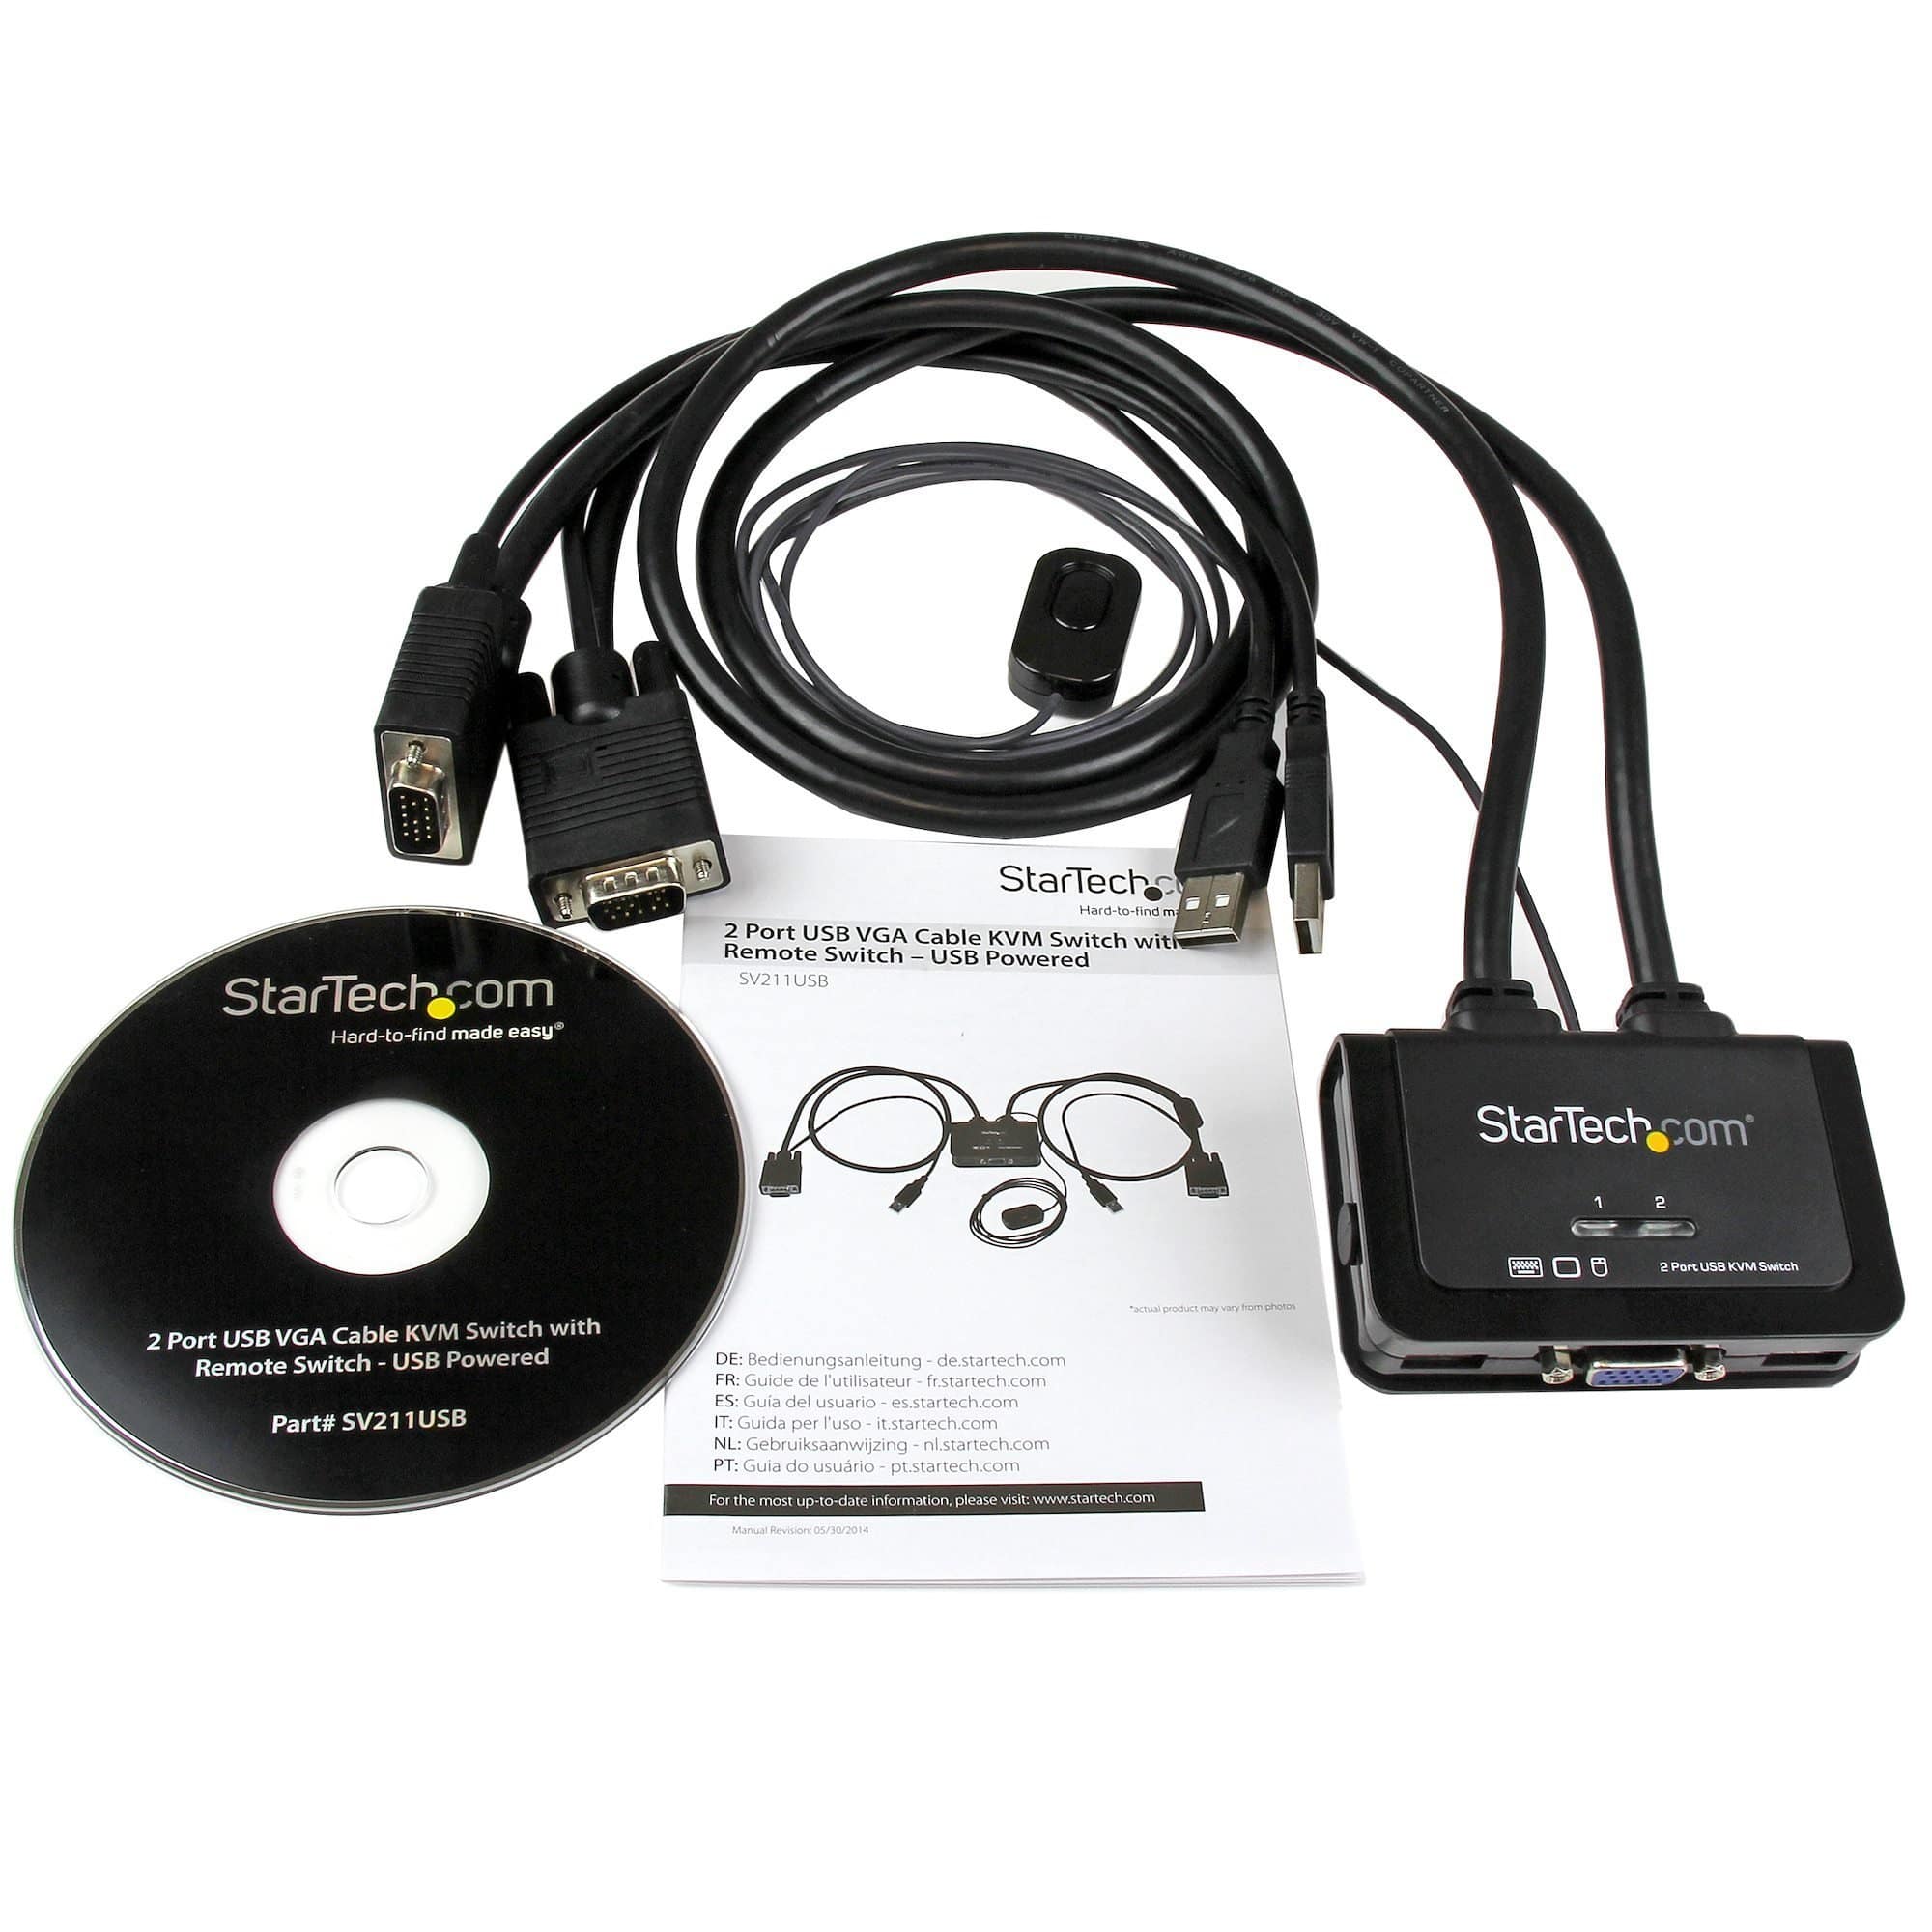 StarTech 2 Port USB VGA Cable KVM Switch - USB Powered with Remote Switch SV211USB - Buy Singapore